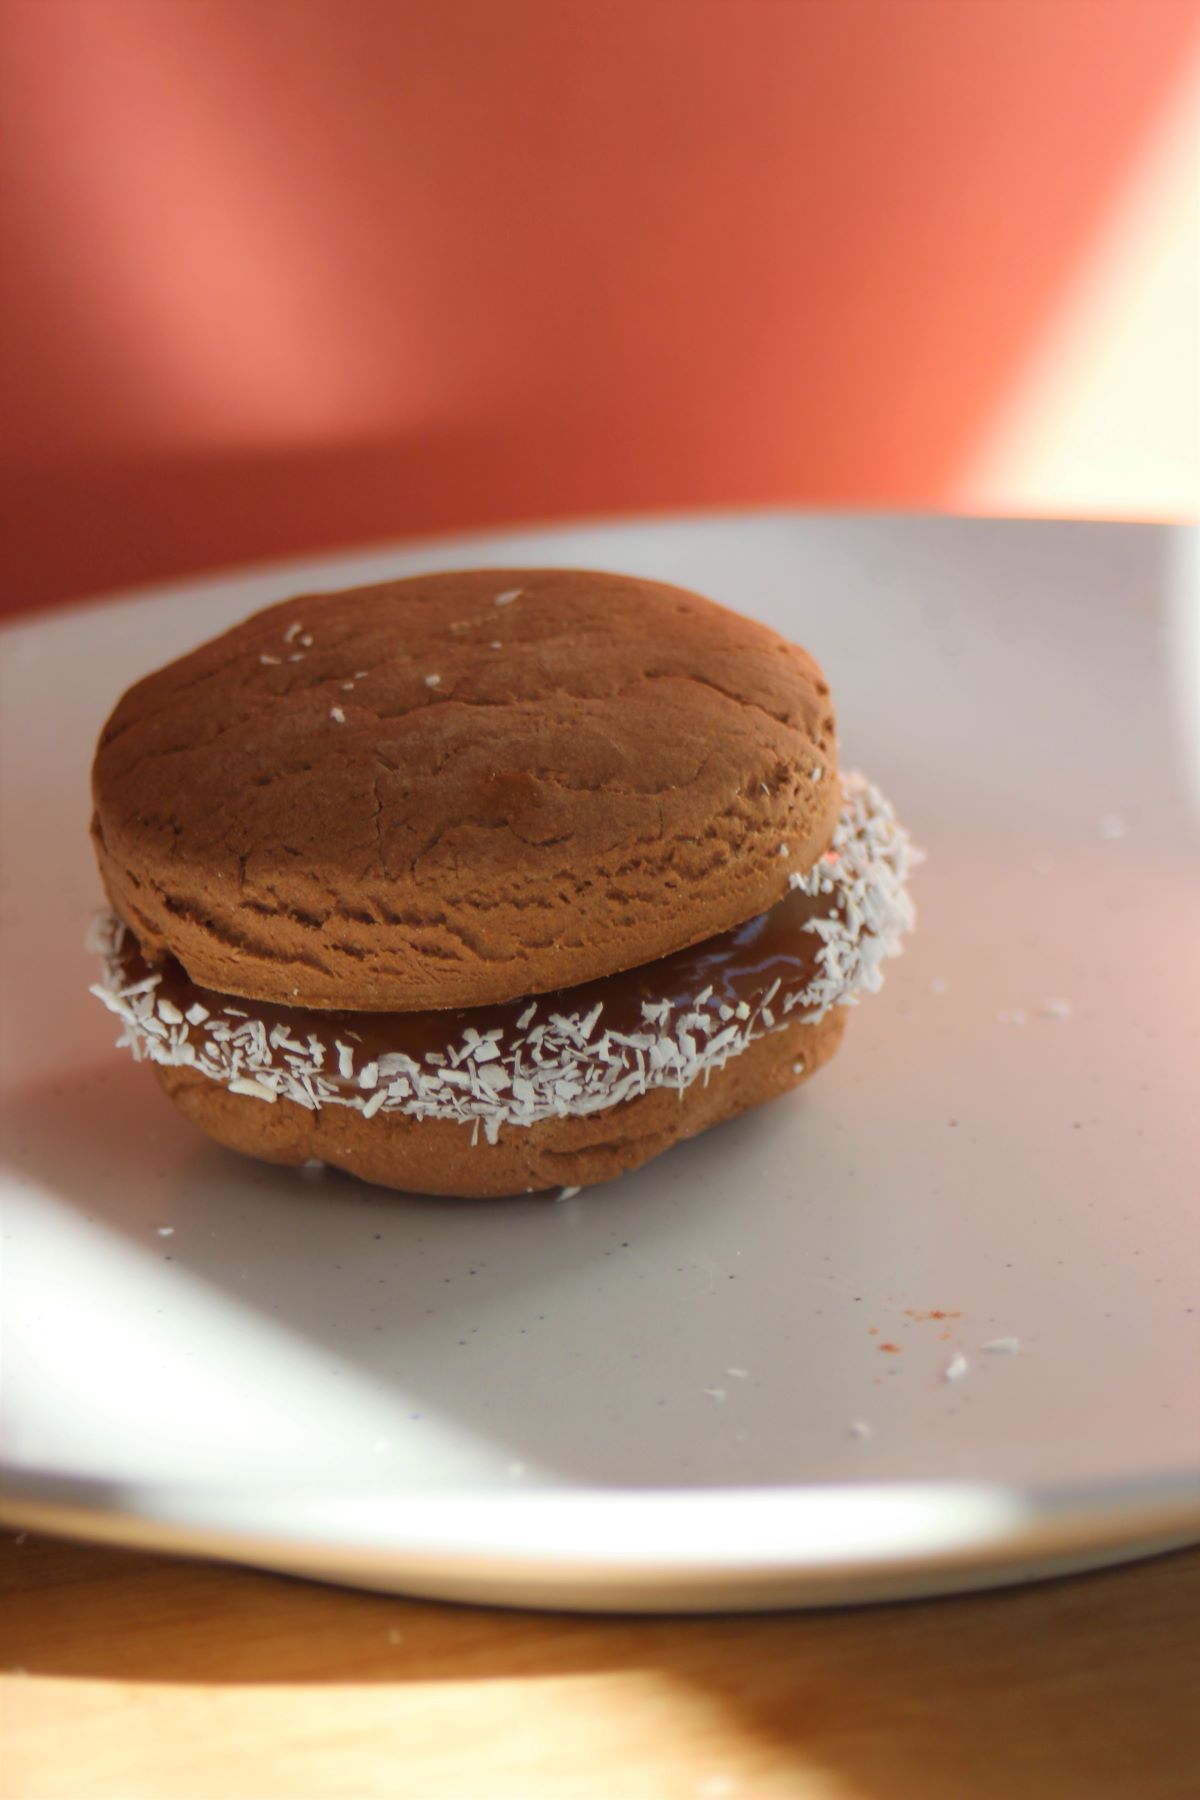 A chocolate alfajor with dulce de leche and shredded coconut on a white plate.